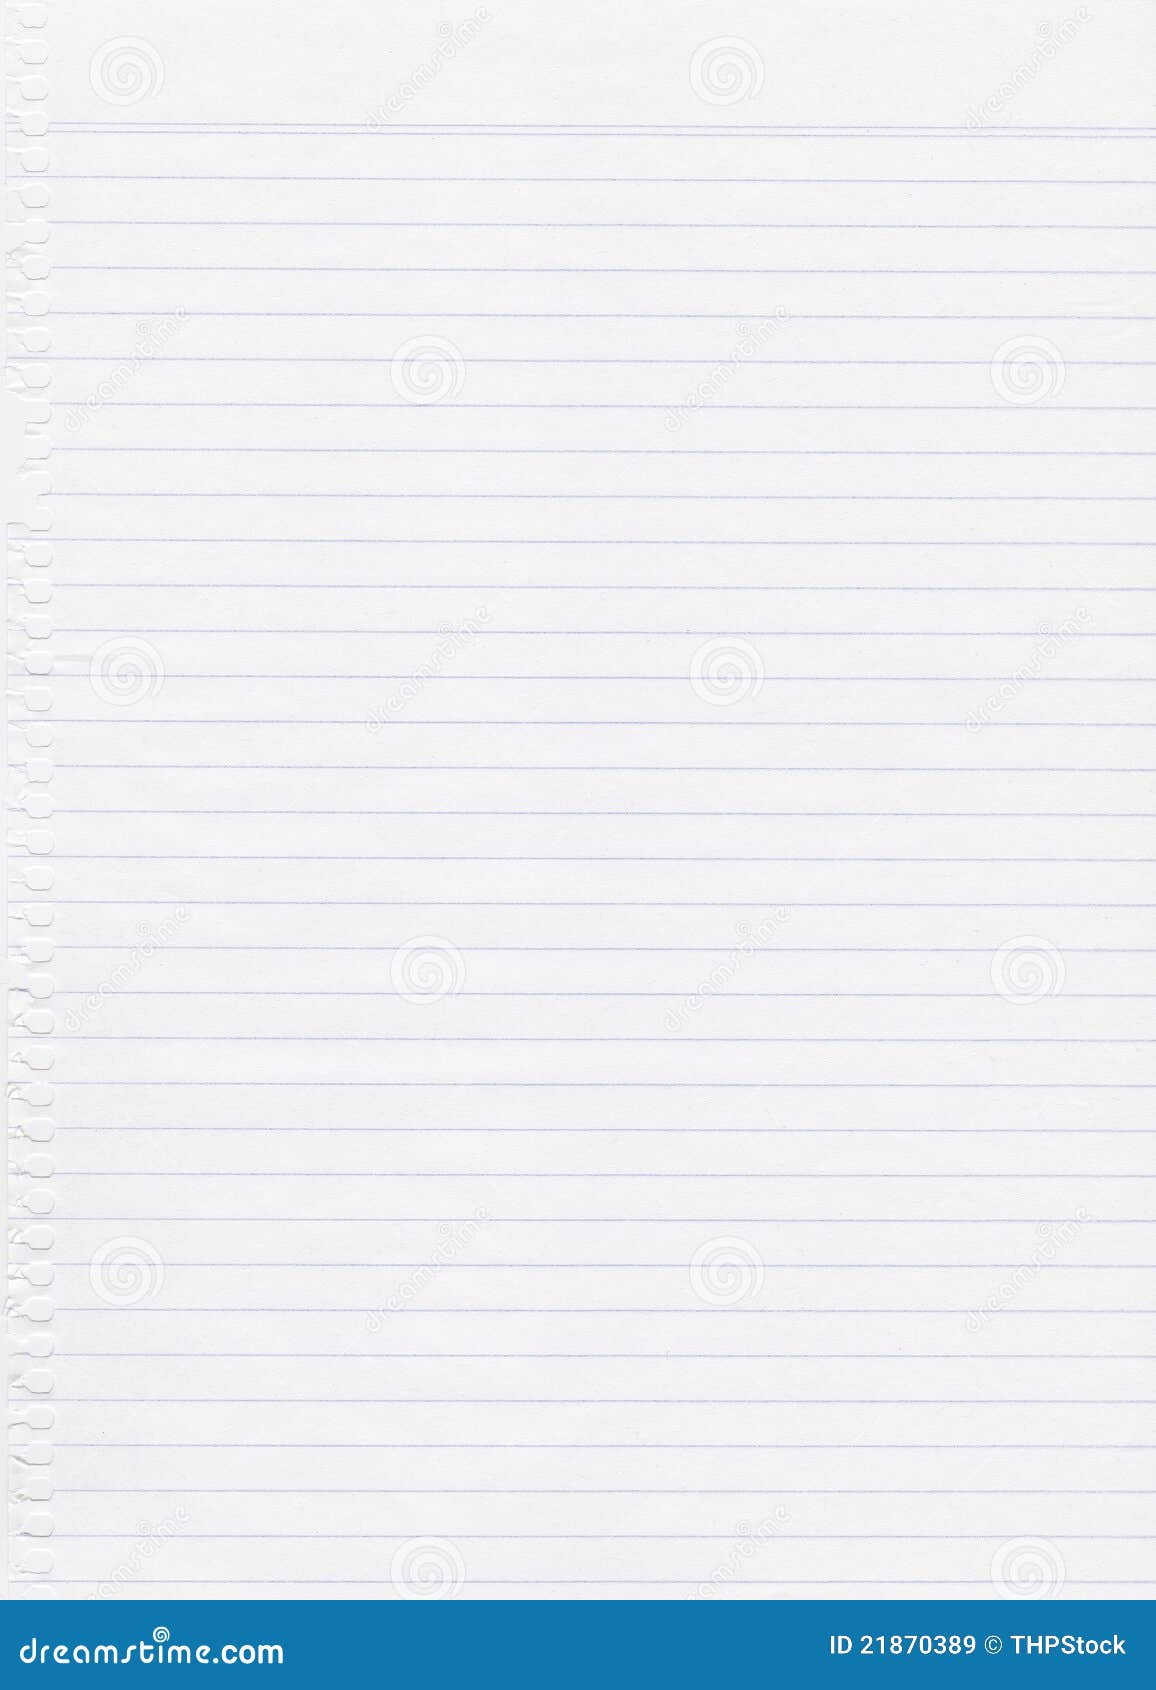 White lined paper